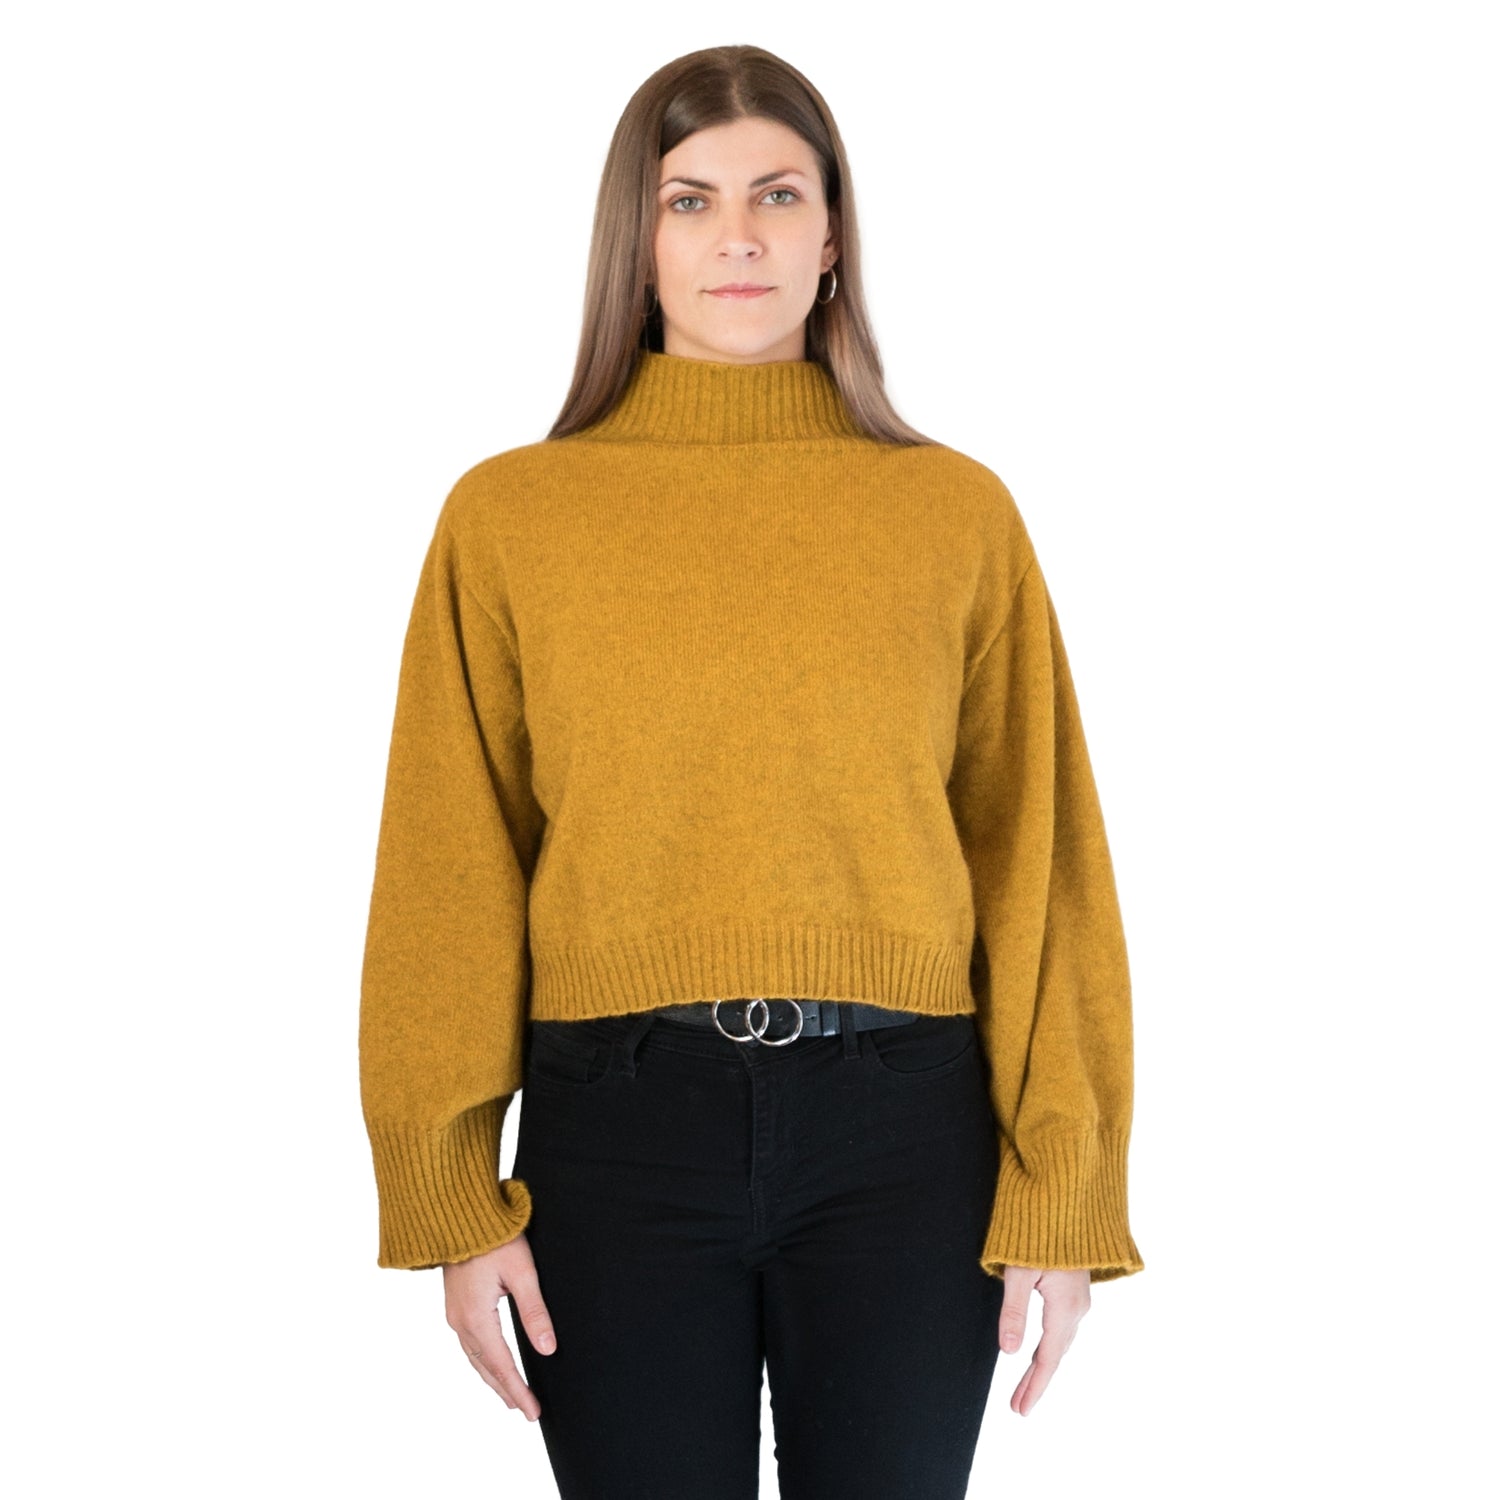 Bell sleeve in colour sunflower. Front